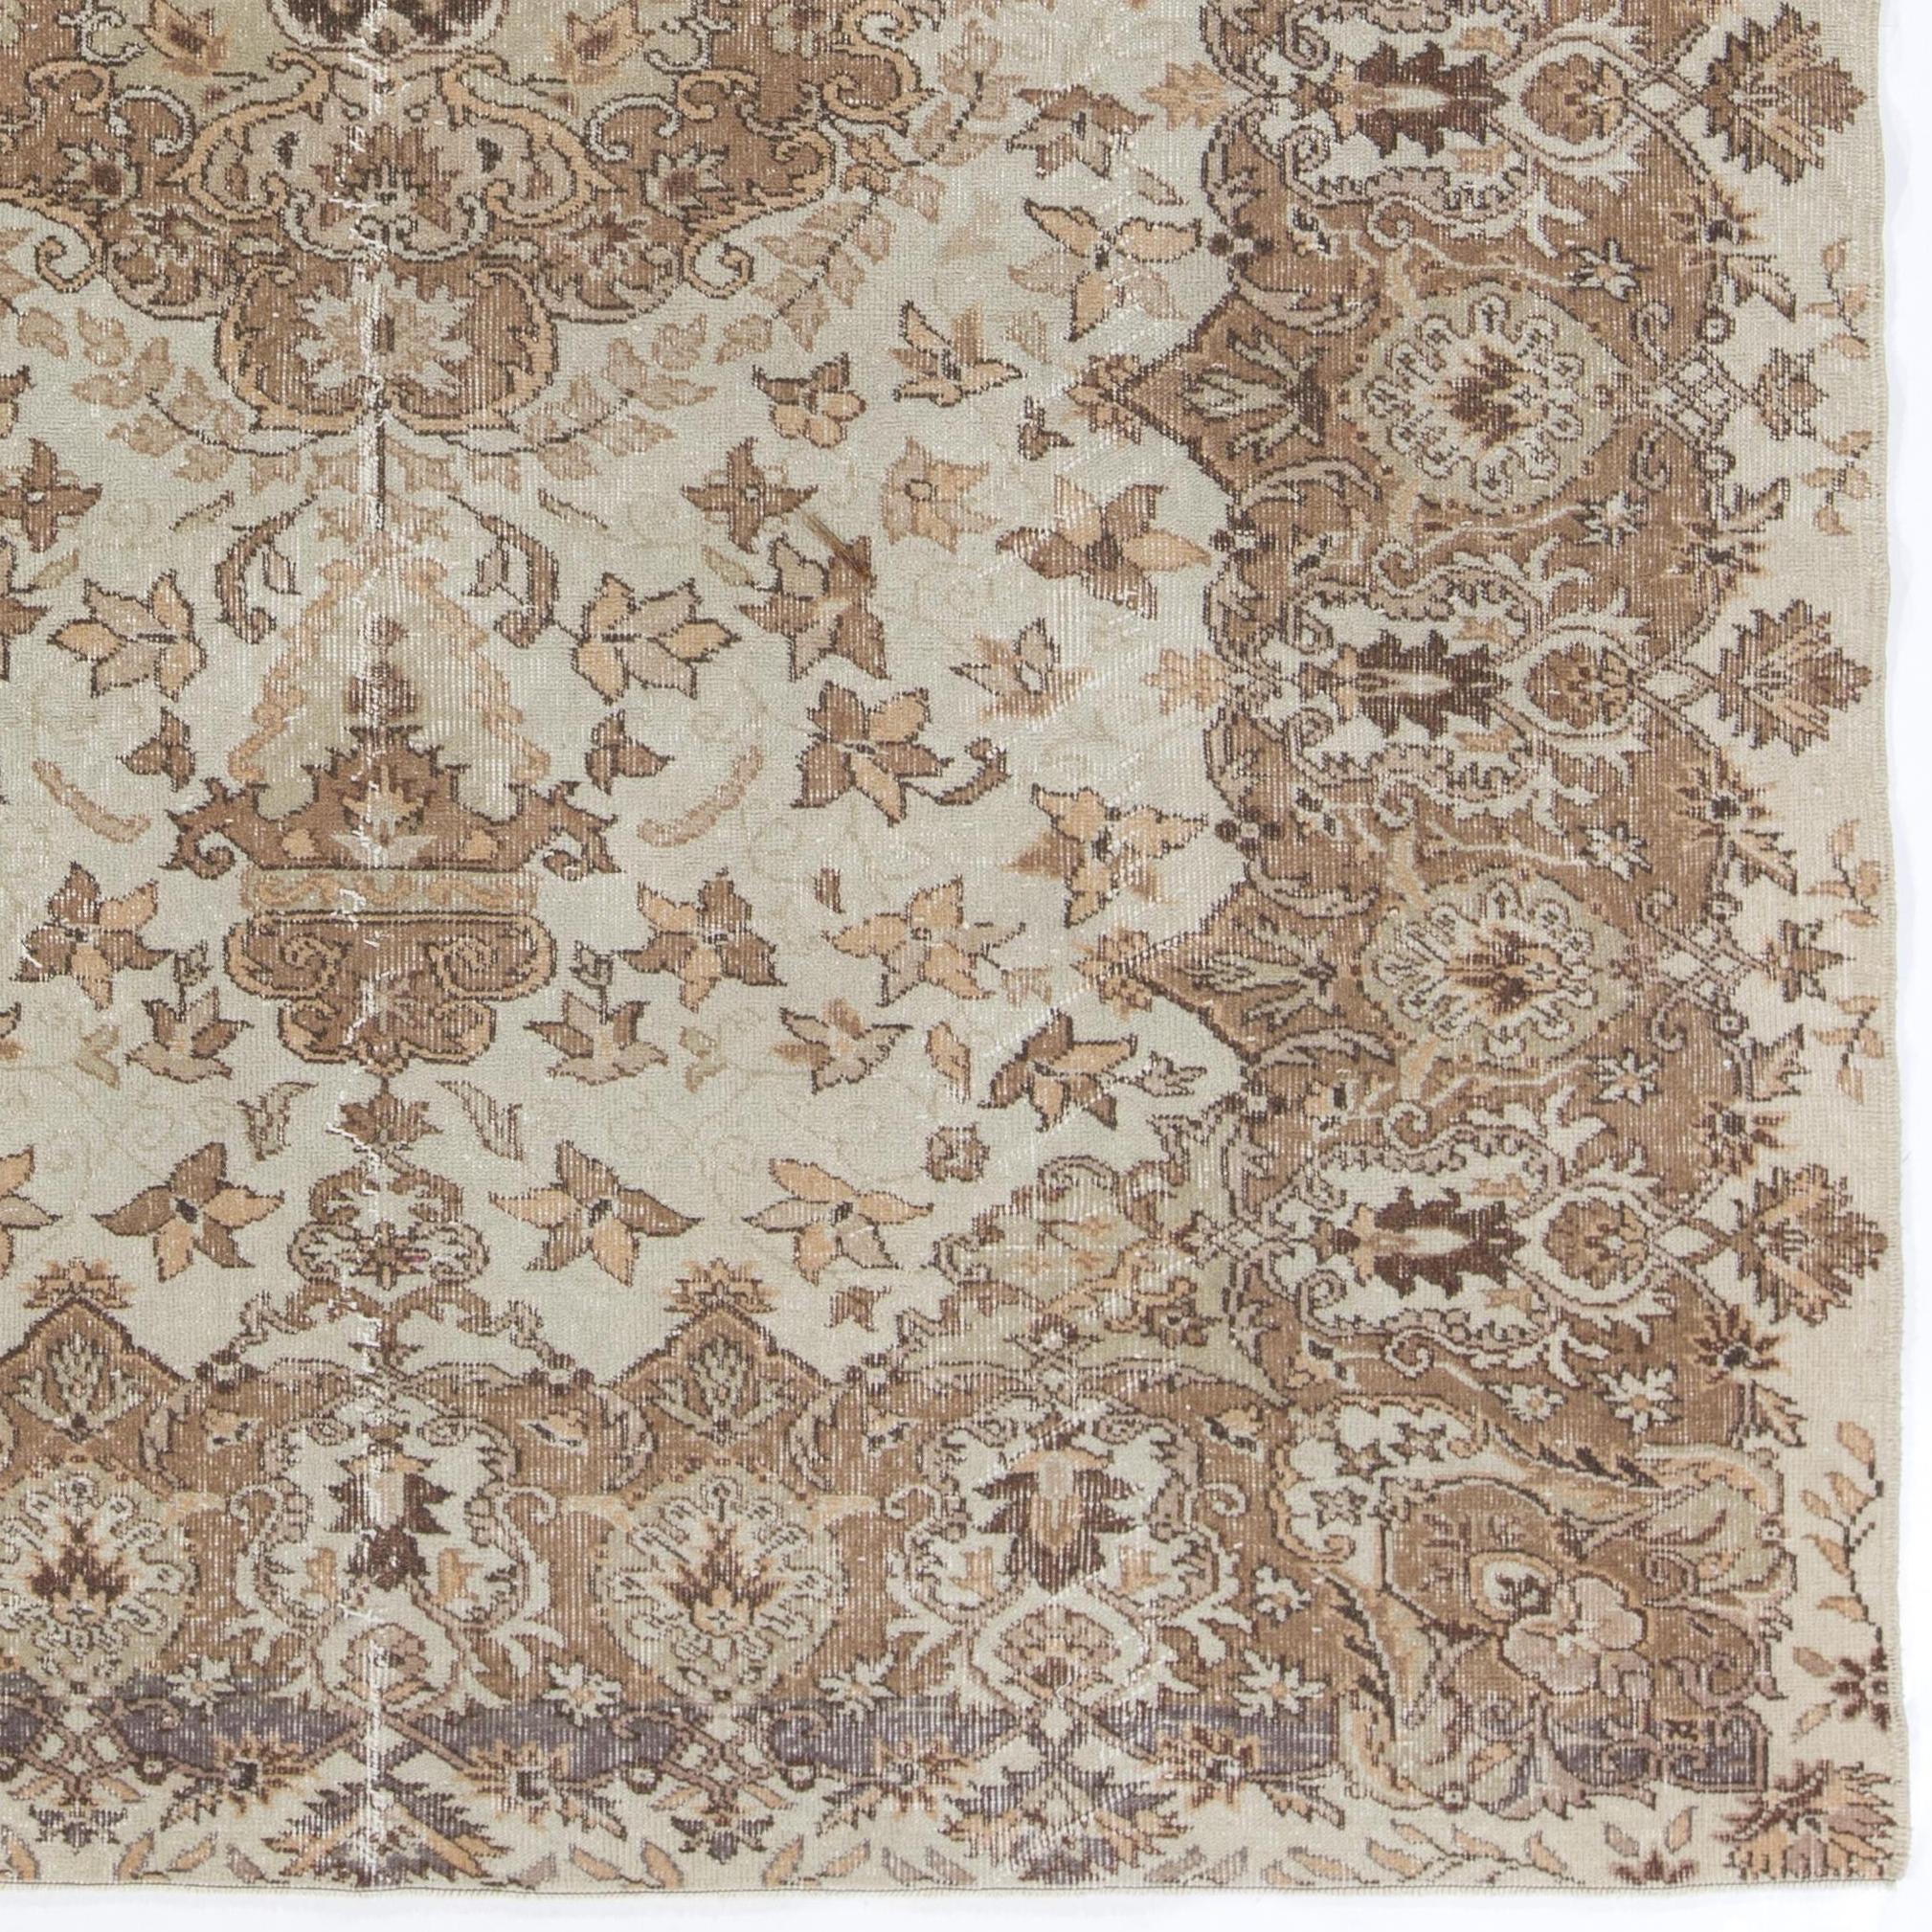 Hand-Woven 7.3x10.5 Ft Mid-20th Century Handmade Shabby Chic Turkish Wool Area Rug in Beige For Sale